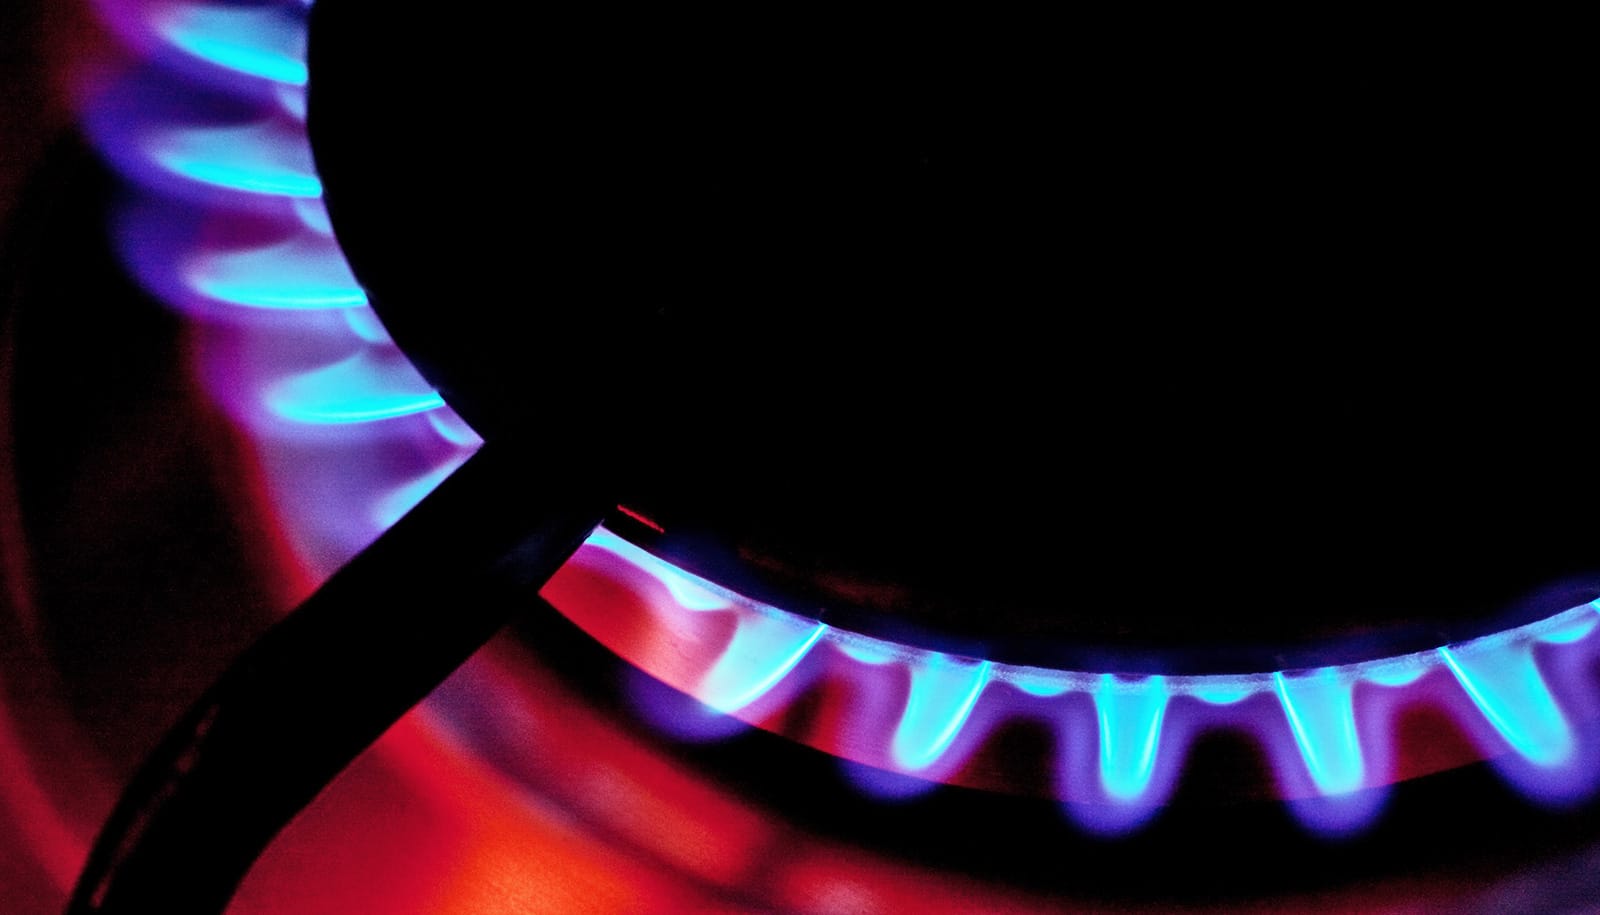 A gas stove burner with blue flames coming out of it.